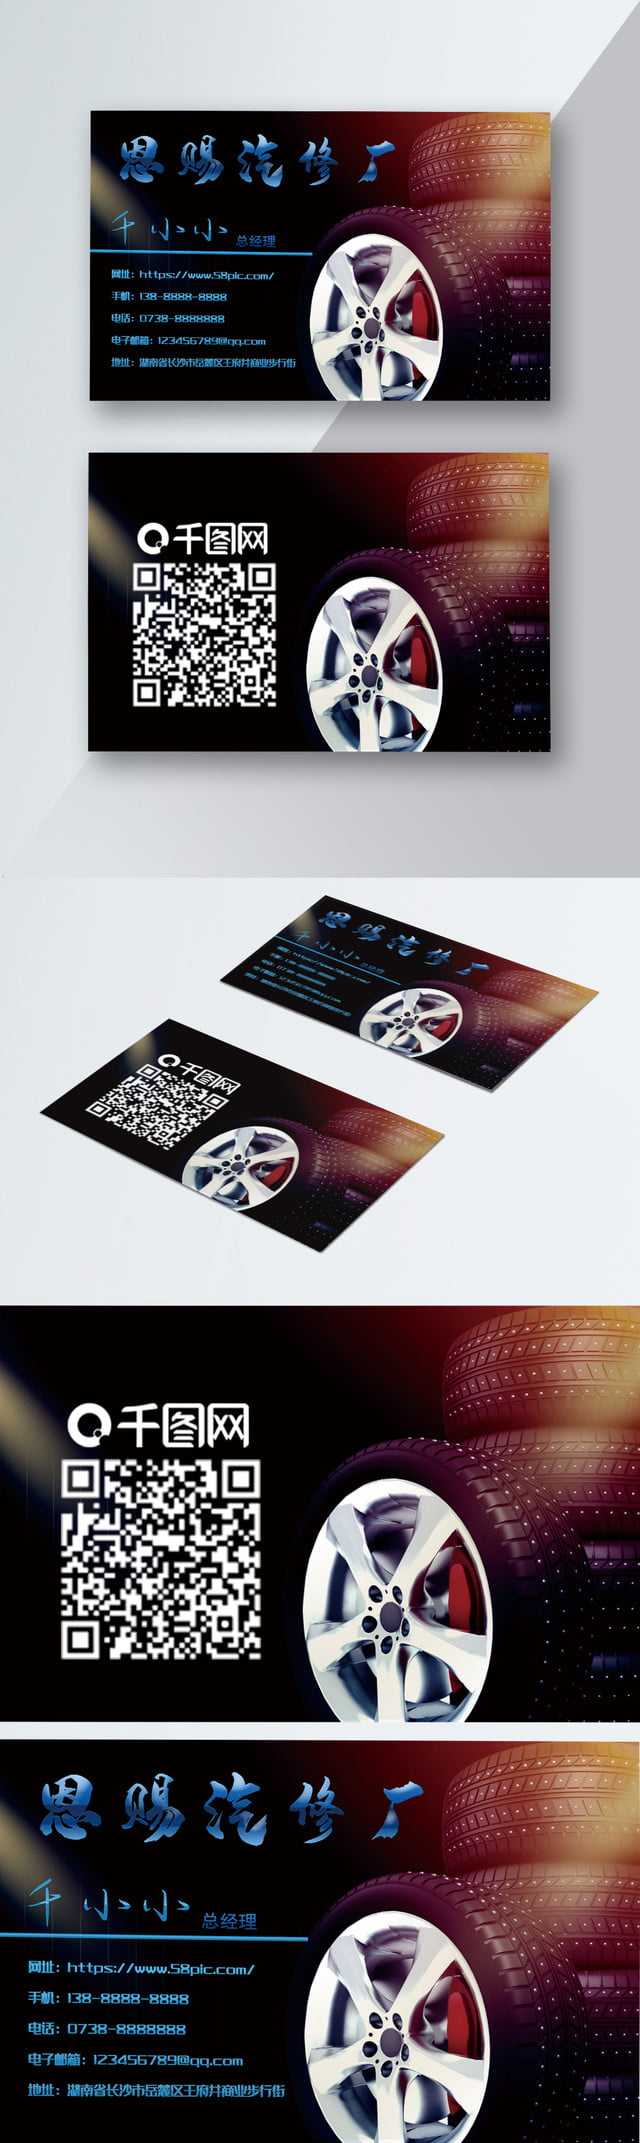 Gift Car Repair Factory Business Card Material Download Gift For Automotive Business Card Templates